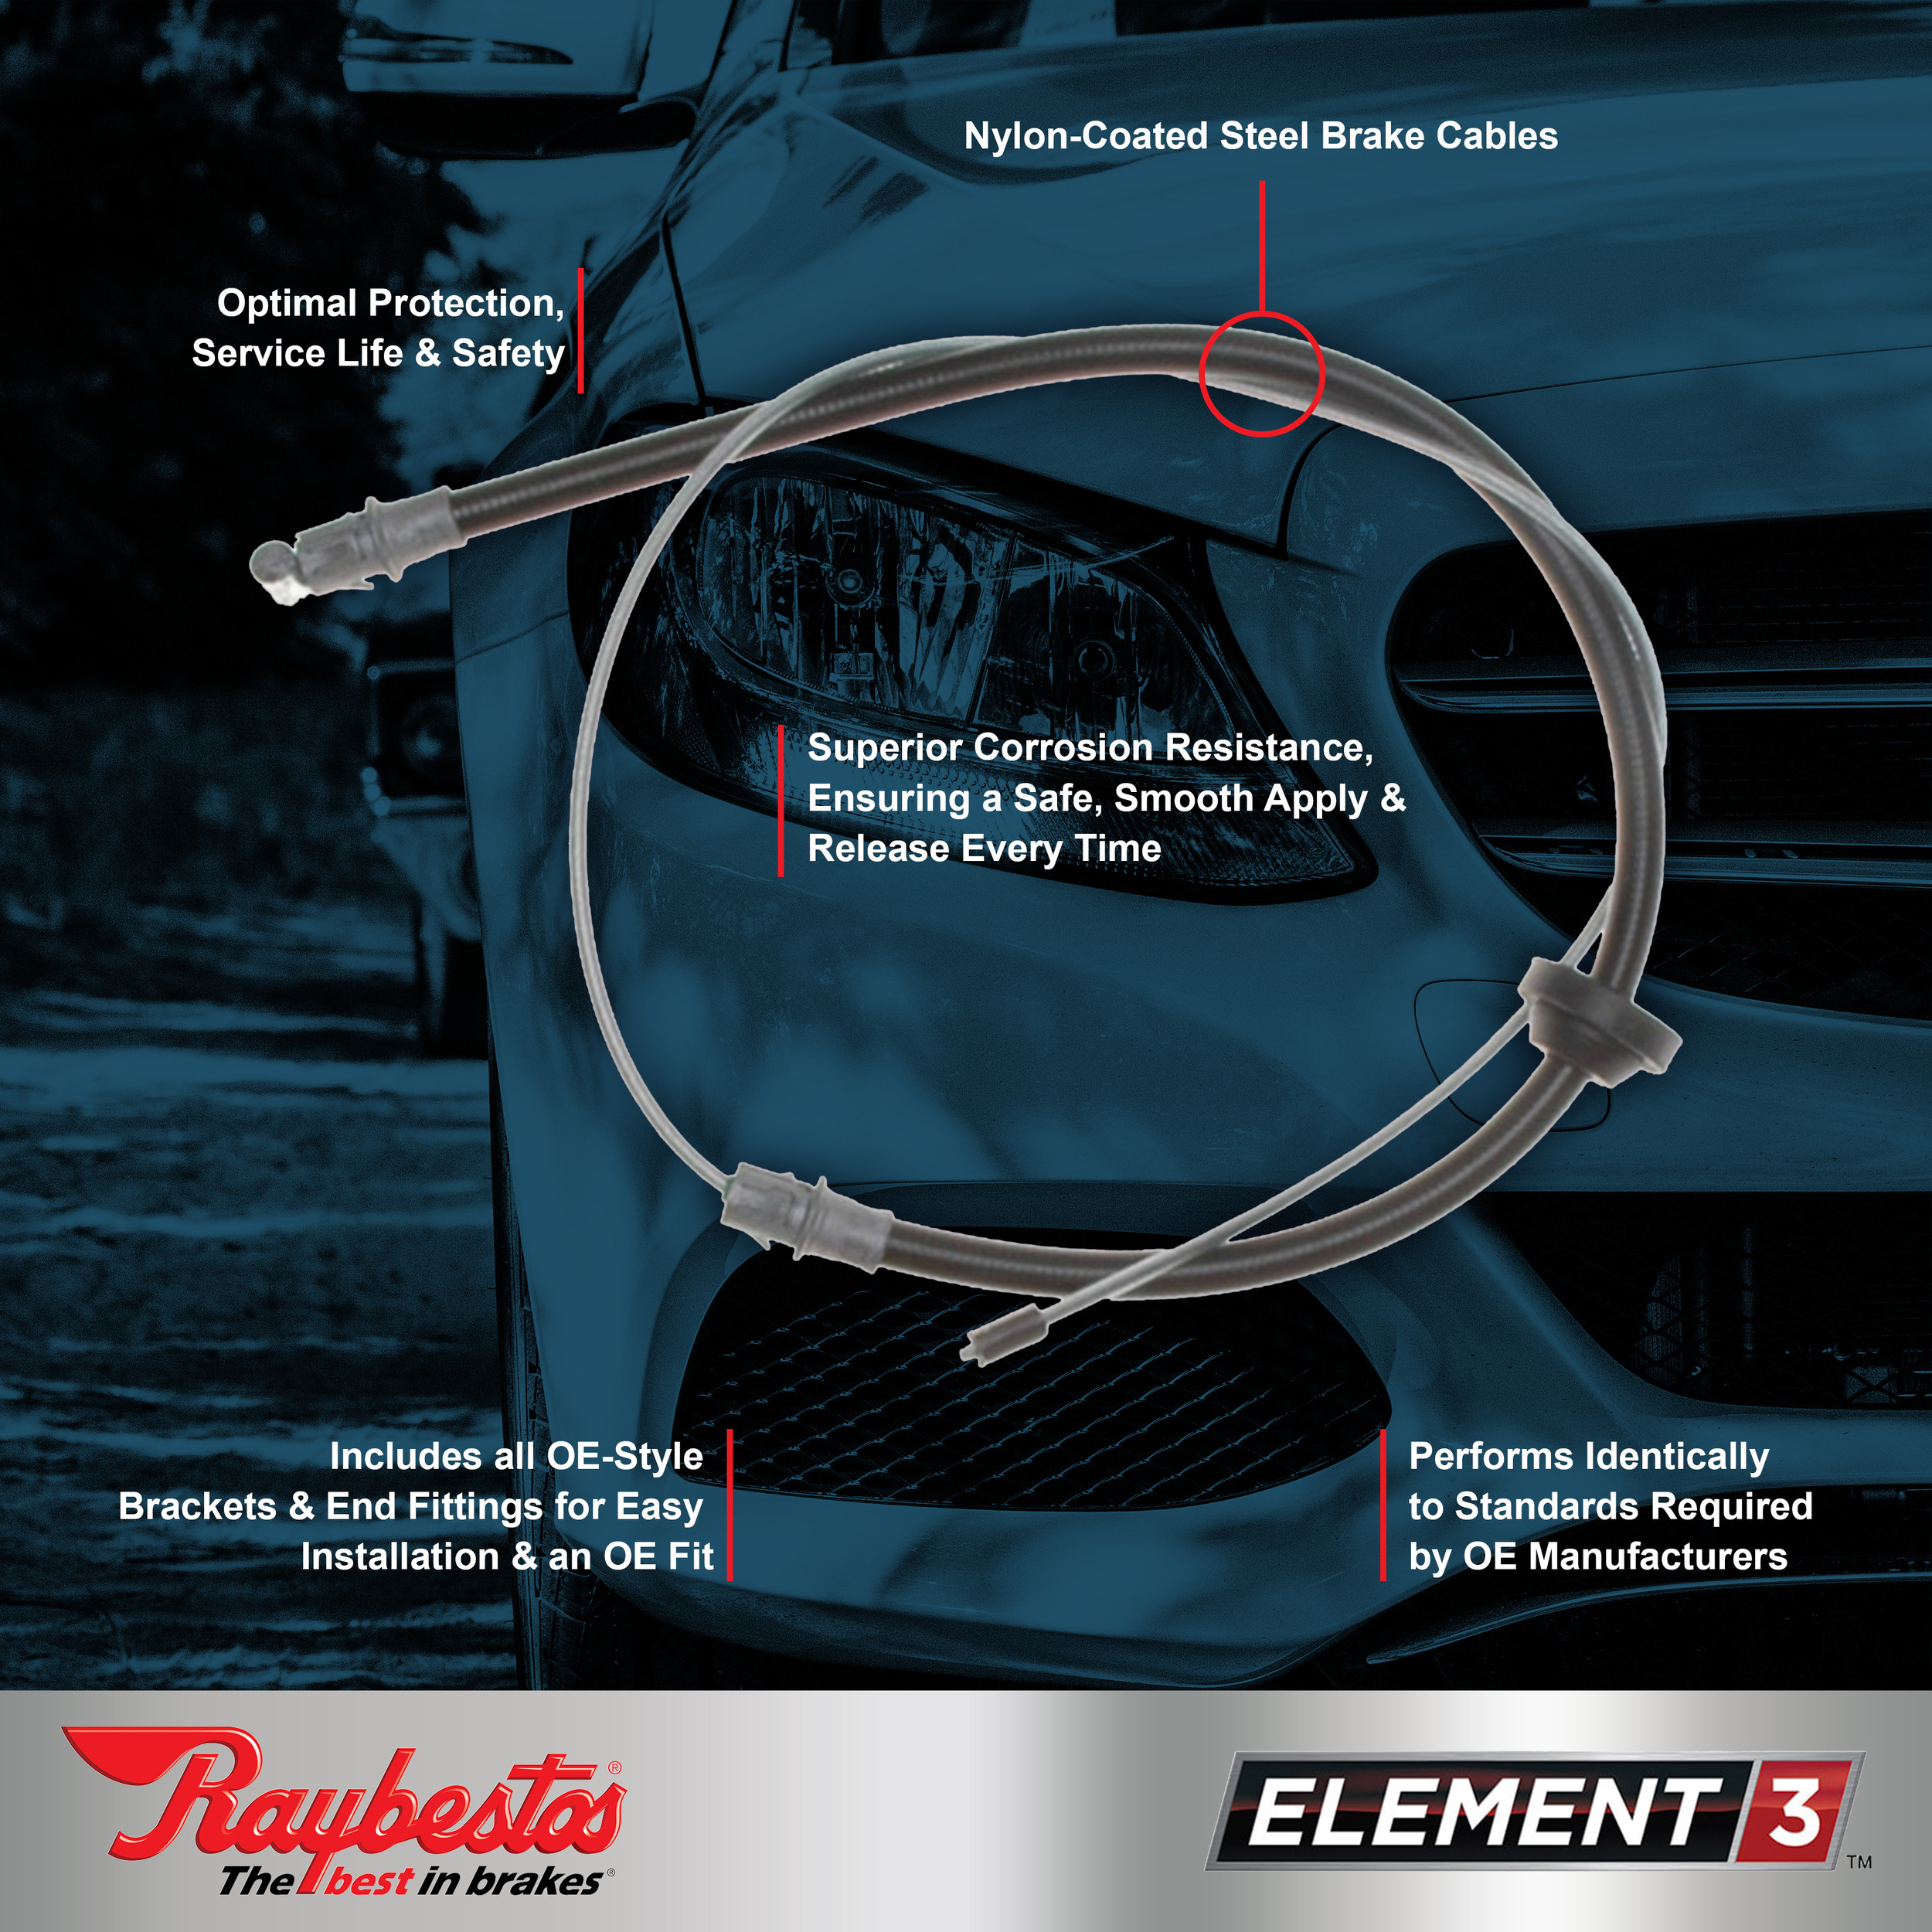 Raybestos Element3 Brake Cables, BC95309 - image 3 of 6